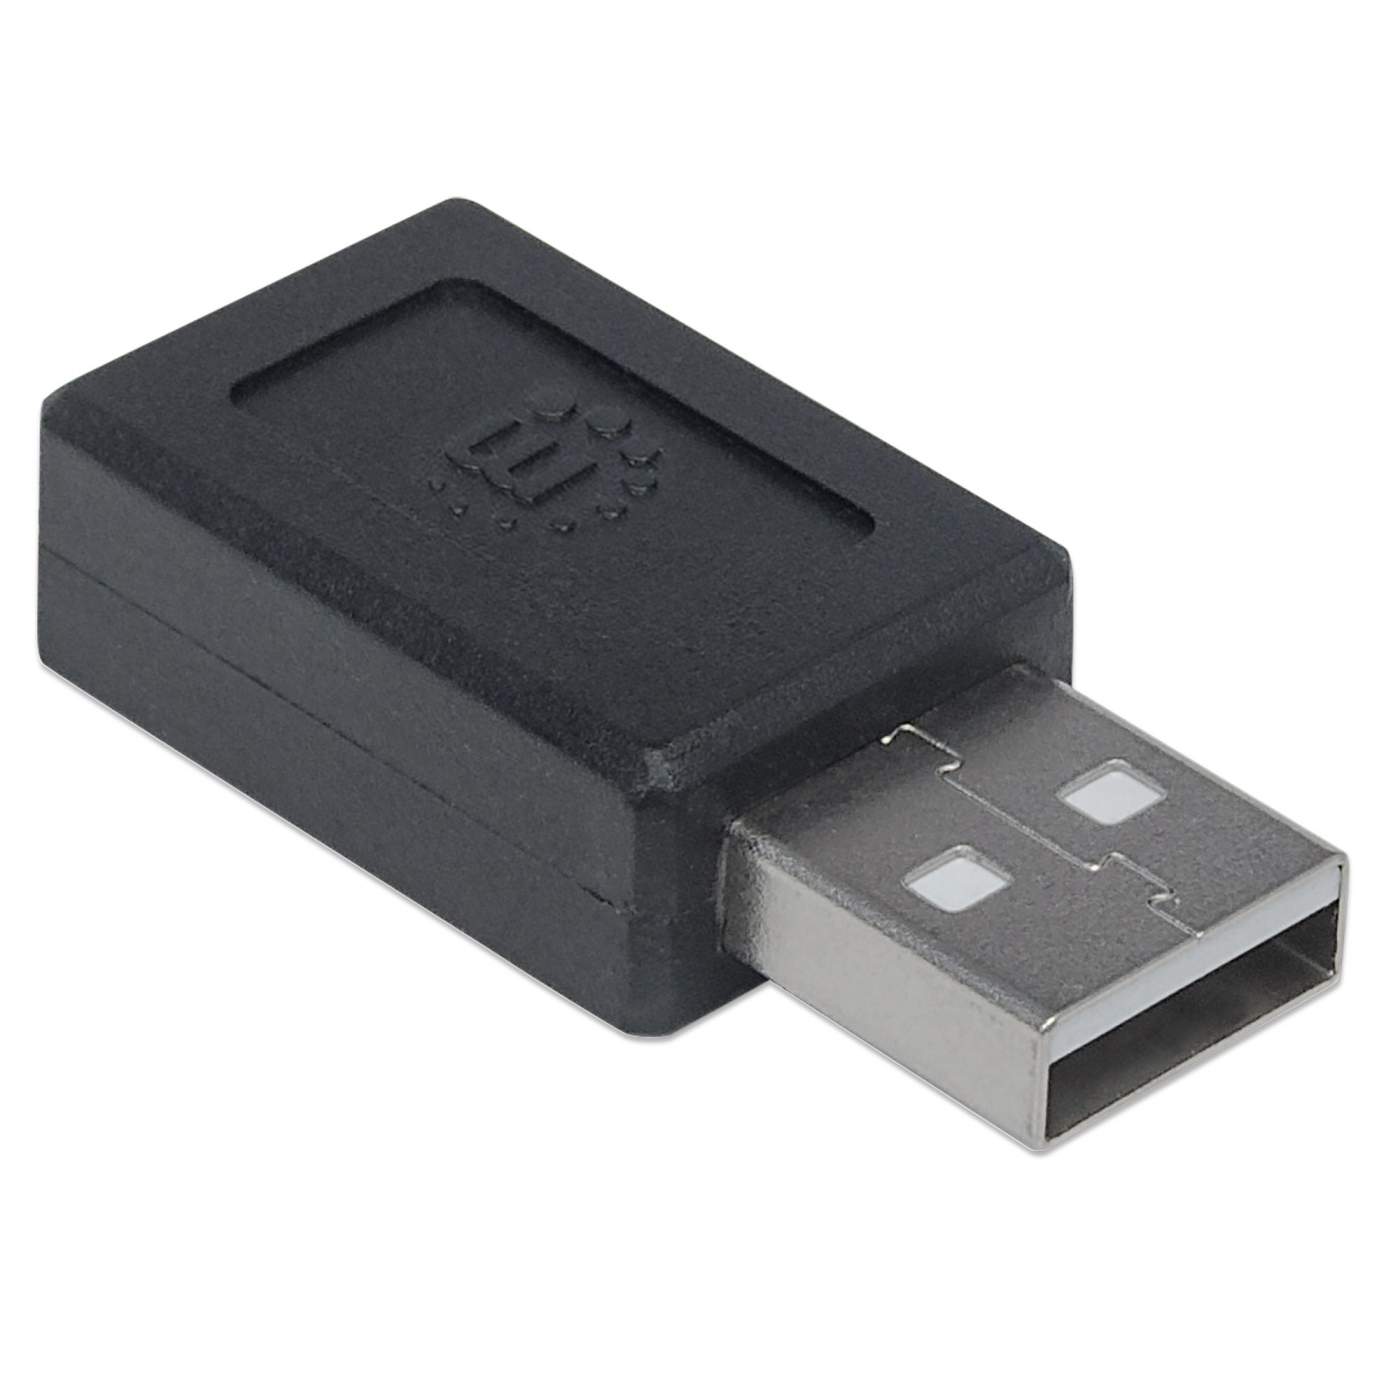 USB 2.0 Type-C to Type-A Adapter Image 3